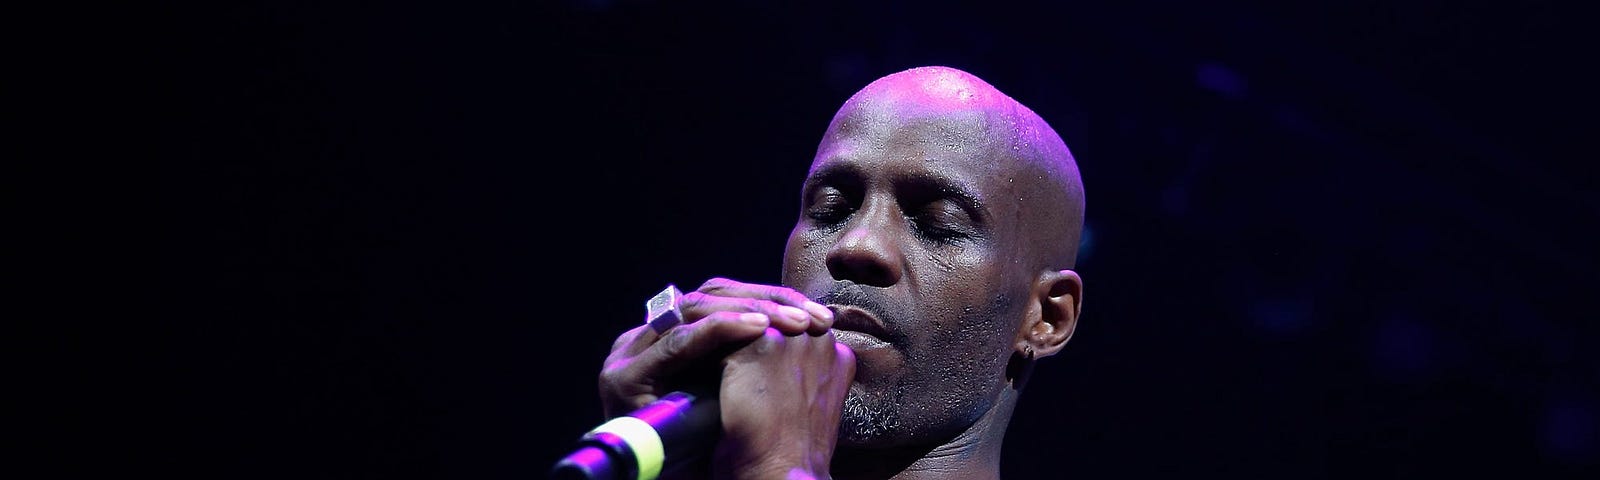 DMX prays during a performance at Barclays Center in Brooklyn, New York on April 21, 2017.